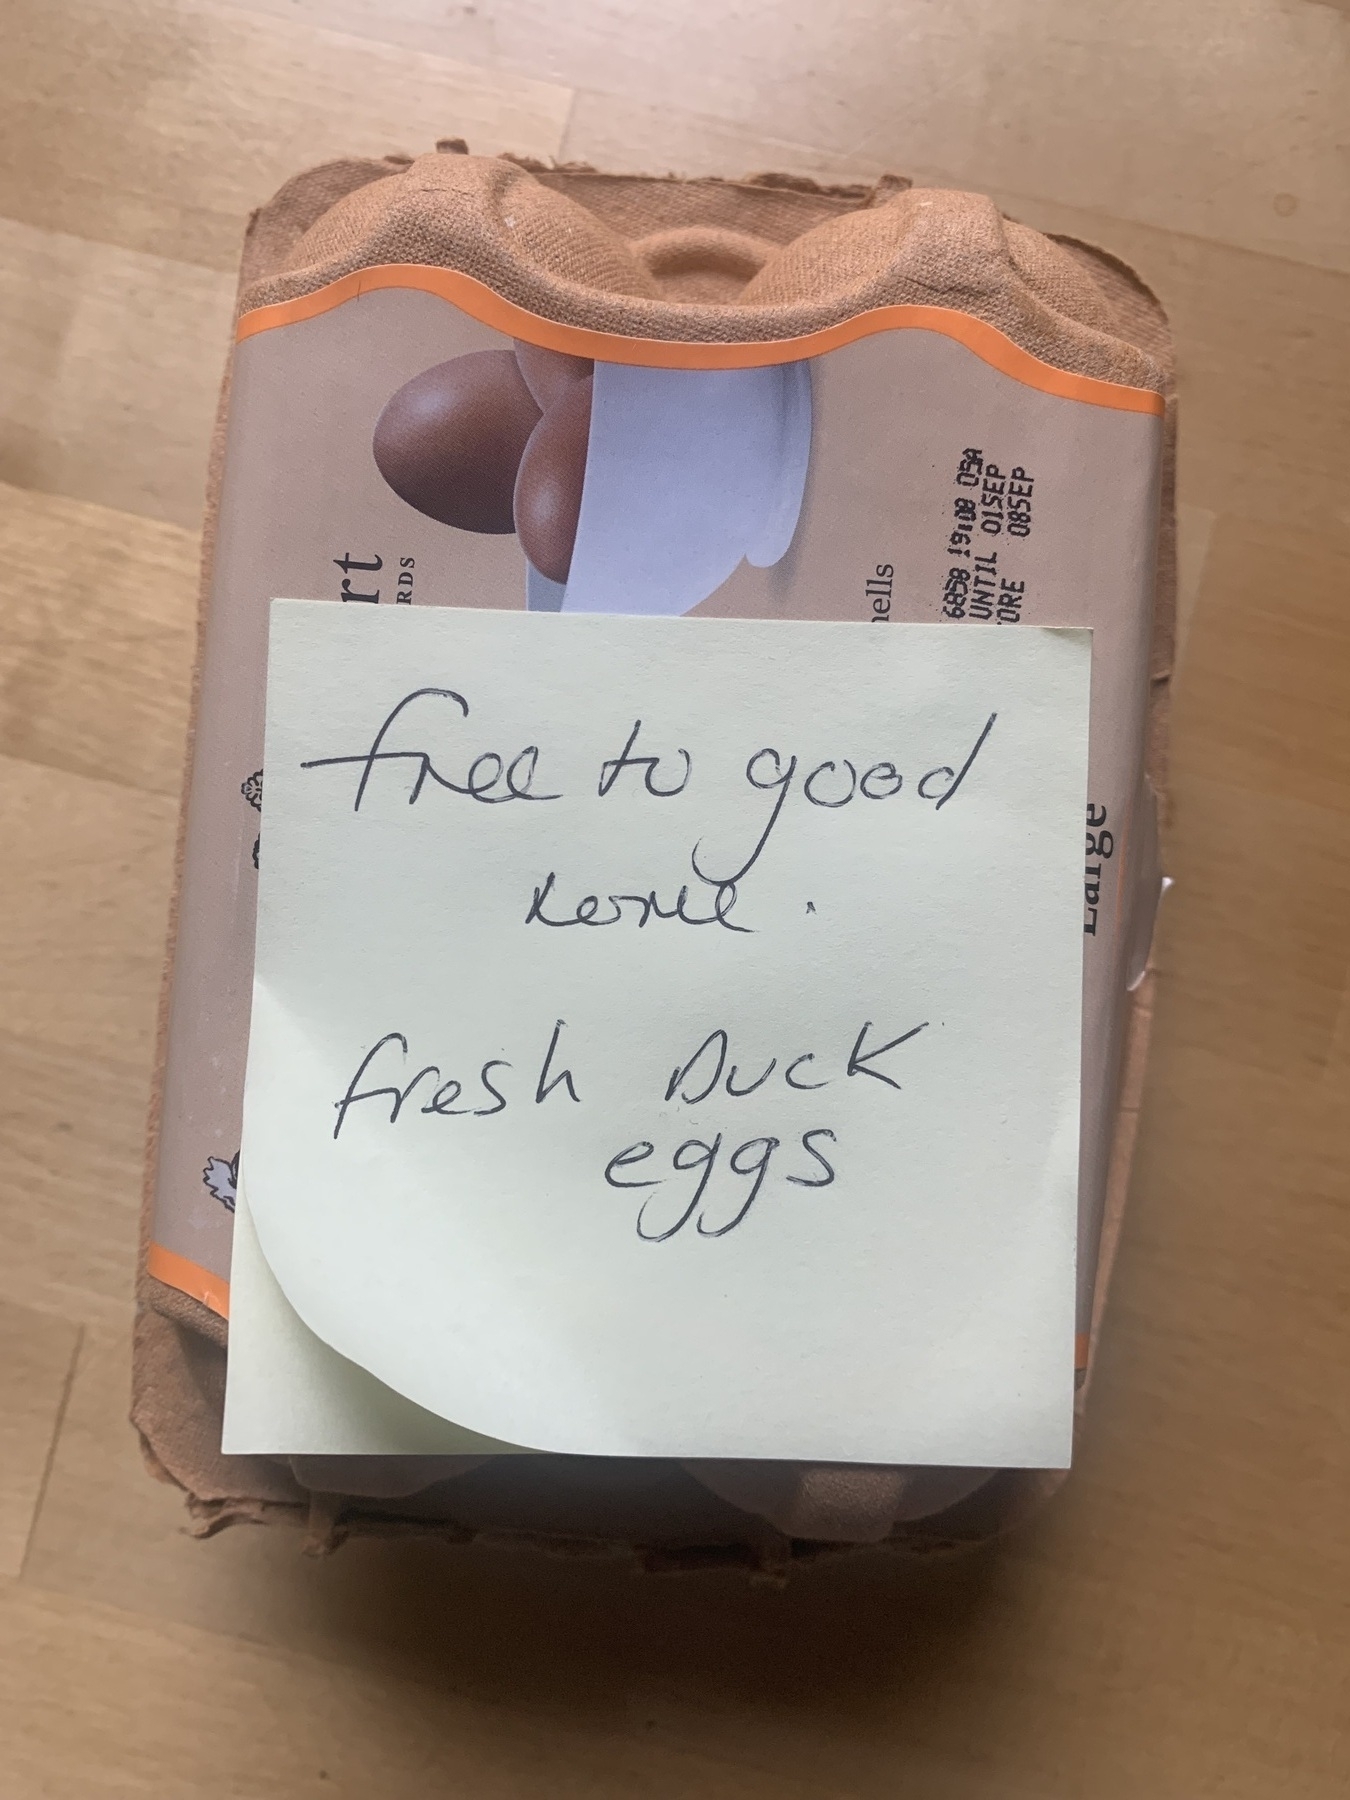 Egg box with sticky note attached reading “Free to a good home. Fresh duck eggs.”